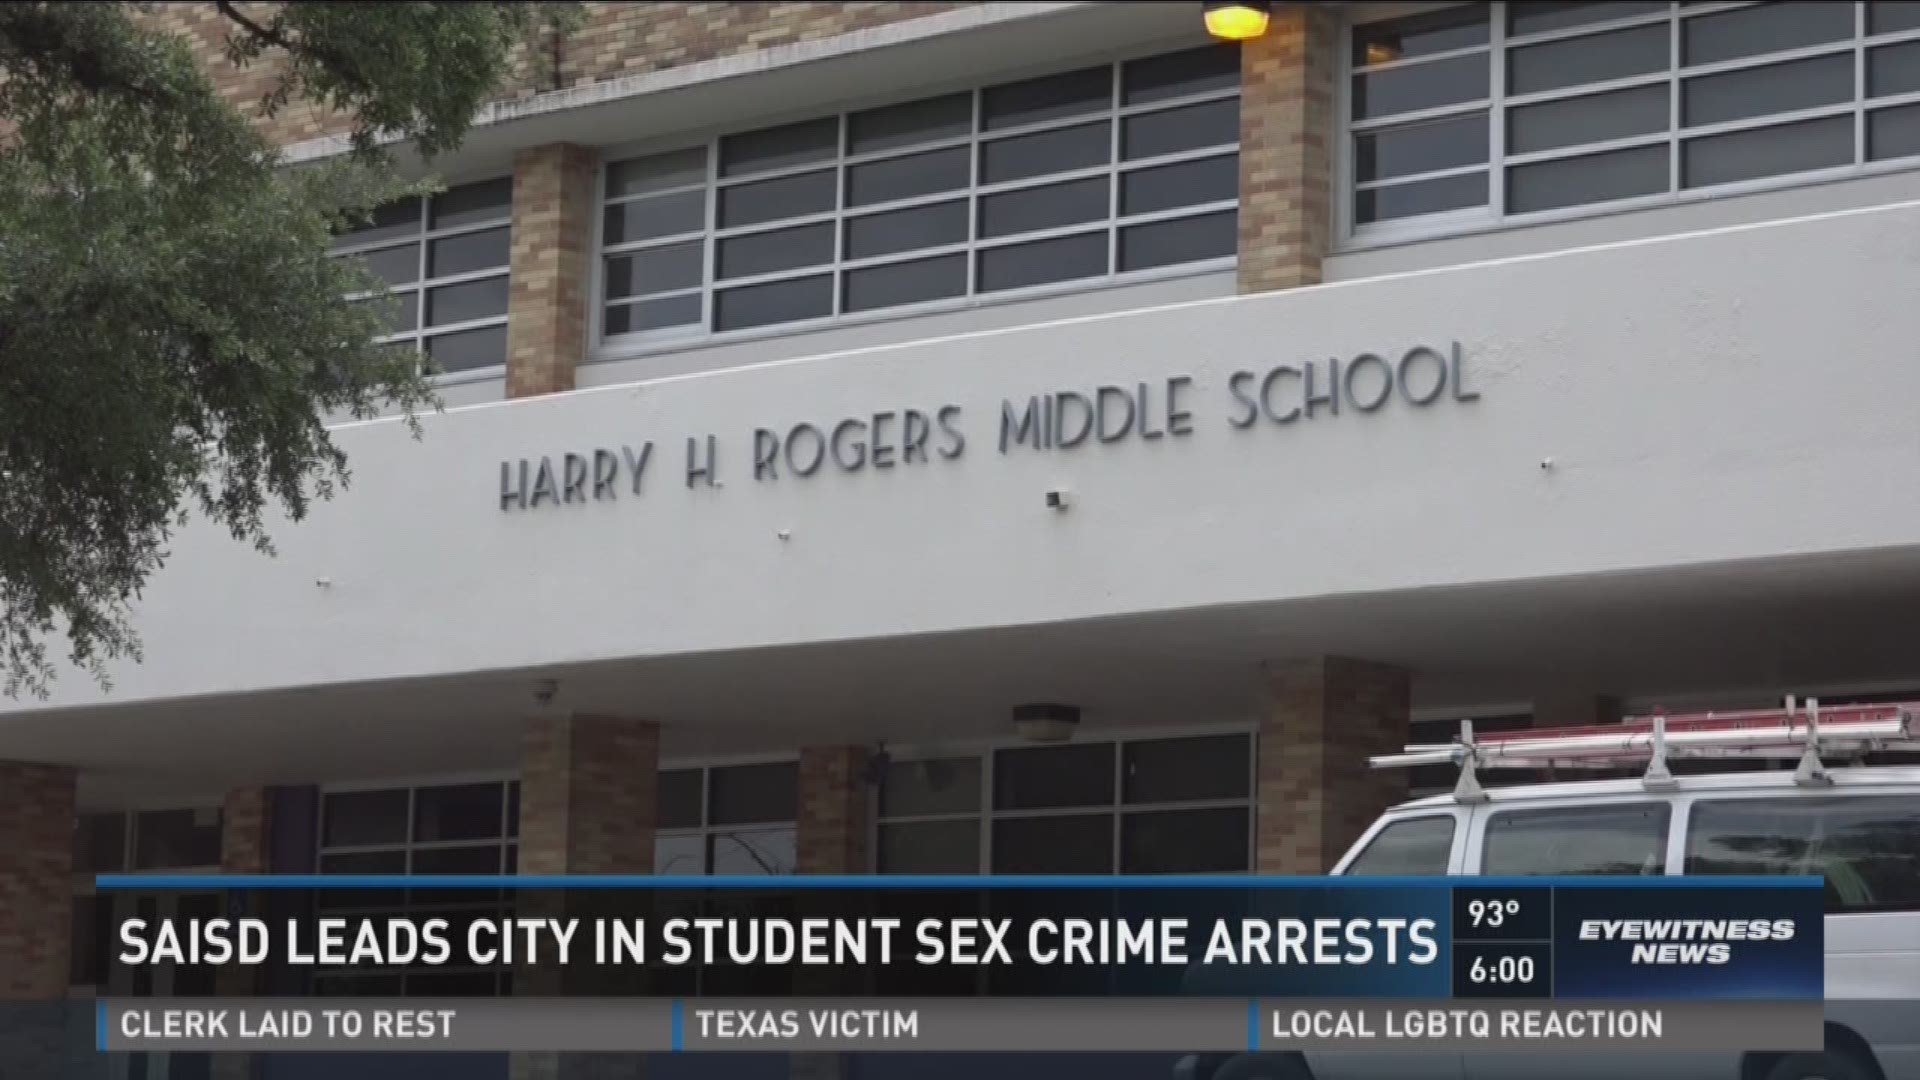 SAISD leads city in student sex crime arrests